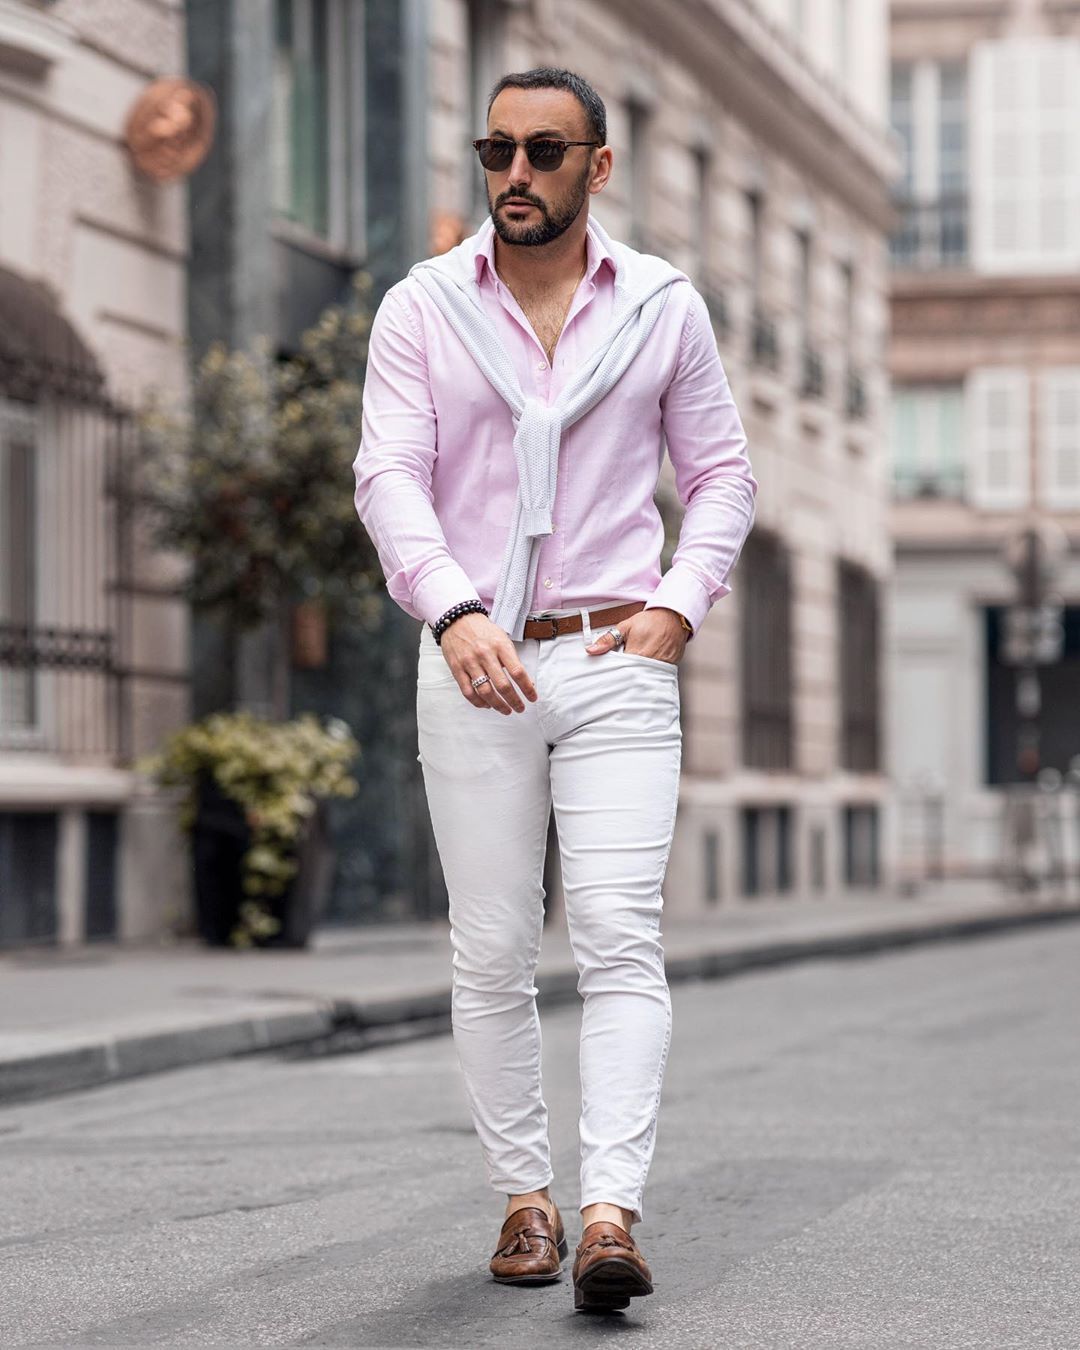 White crew-neck sweater, pink long-sleeve shirt, white chinos, and brown loafers outfit